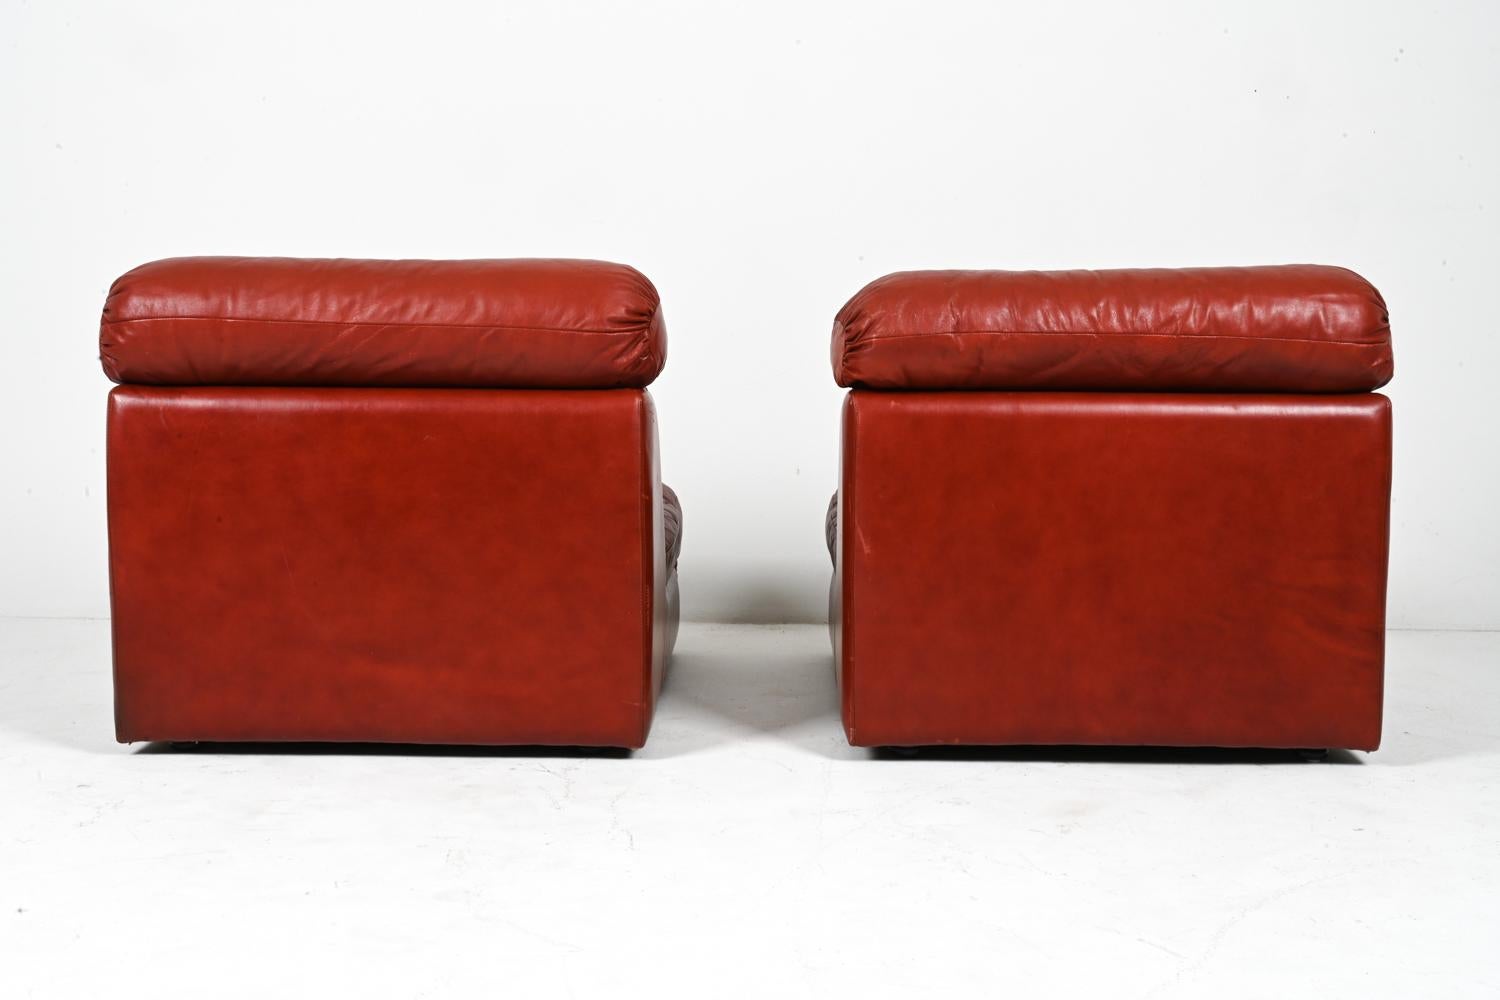 Pair of British Space Age Modular Leather Lounge Chairs by Tetrad For Sale 4